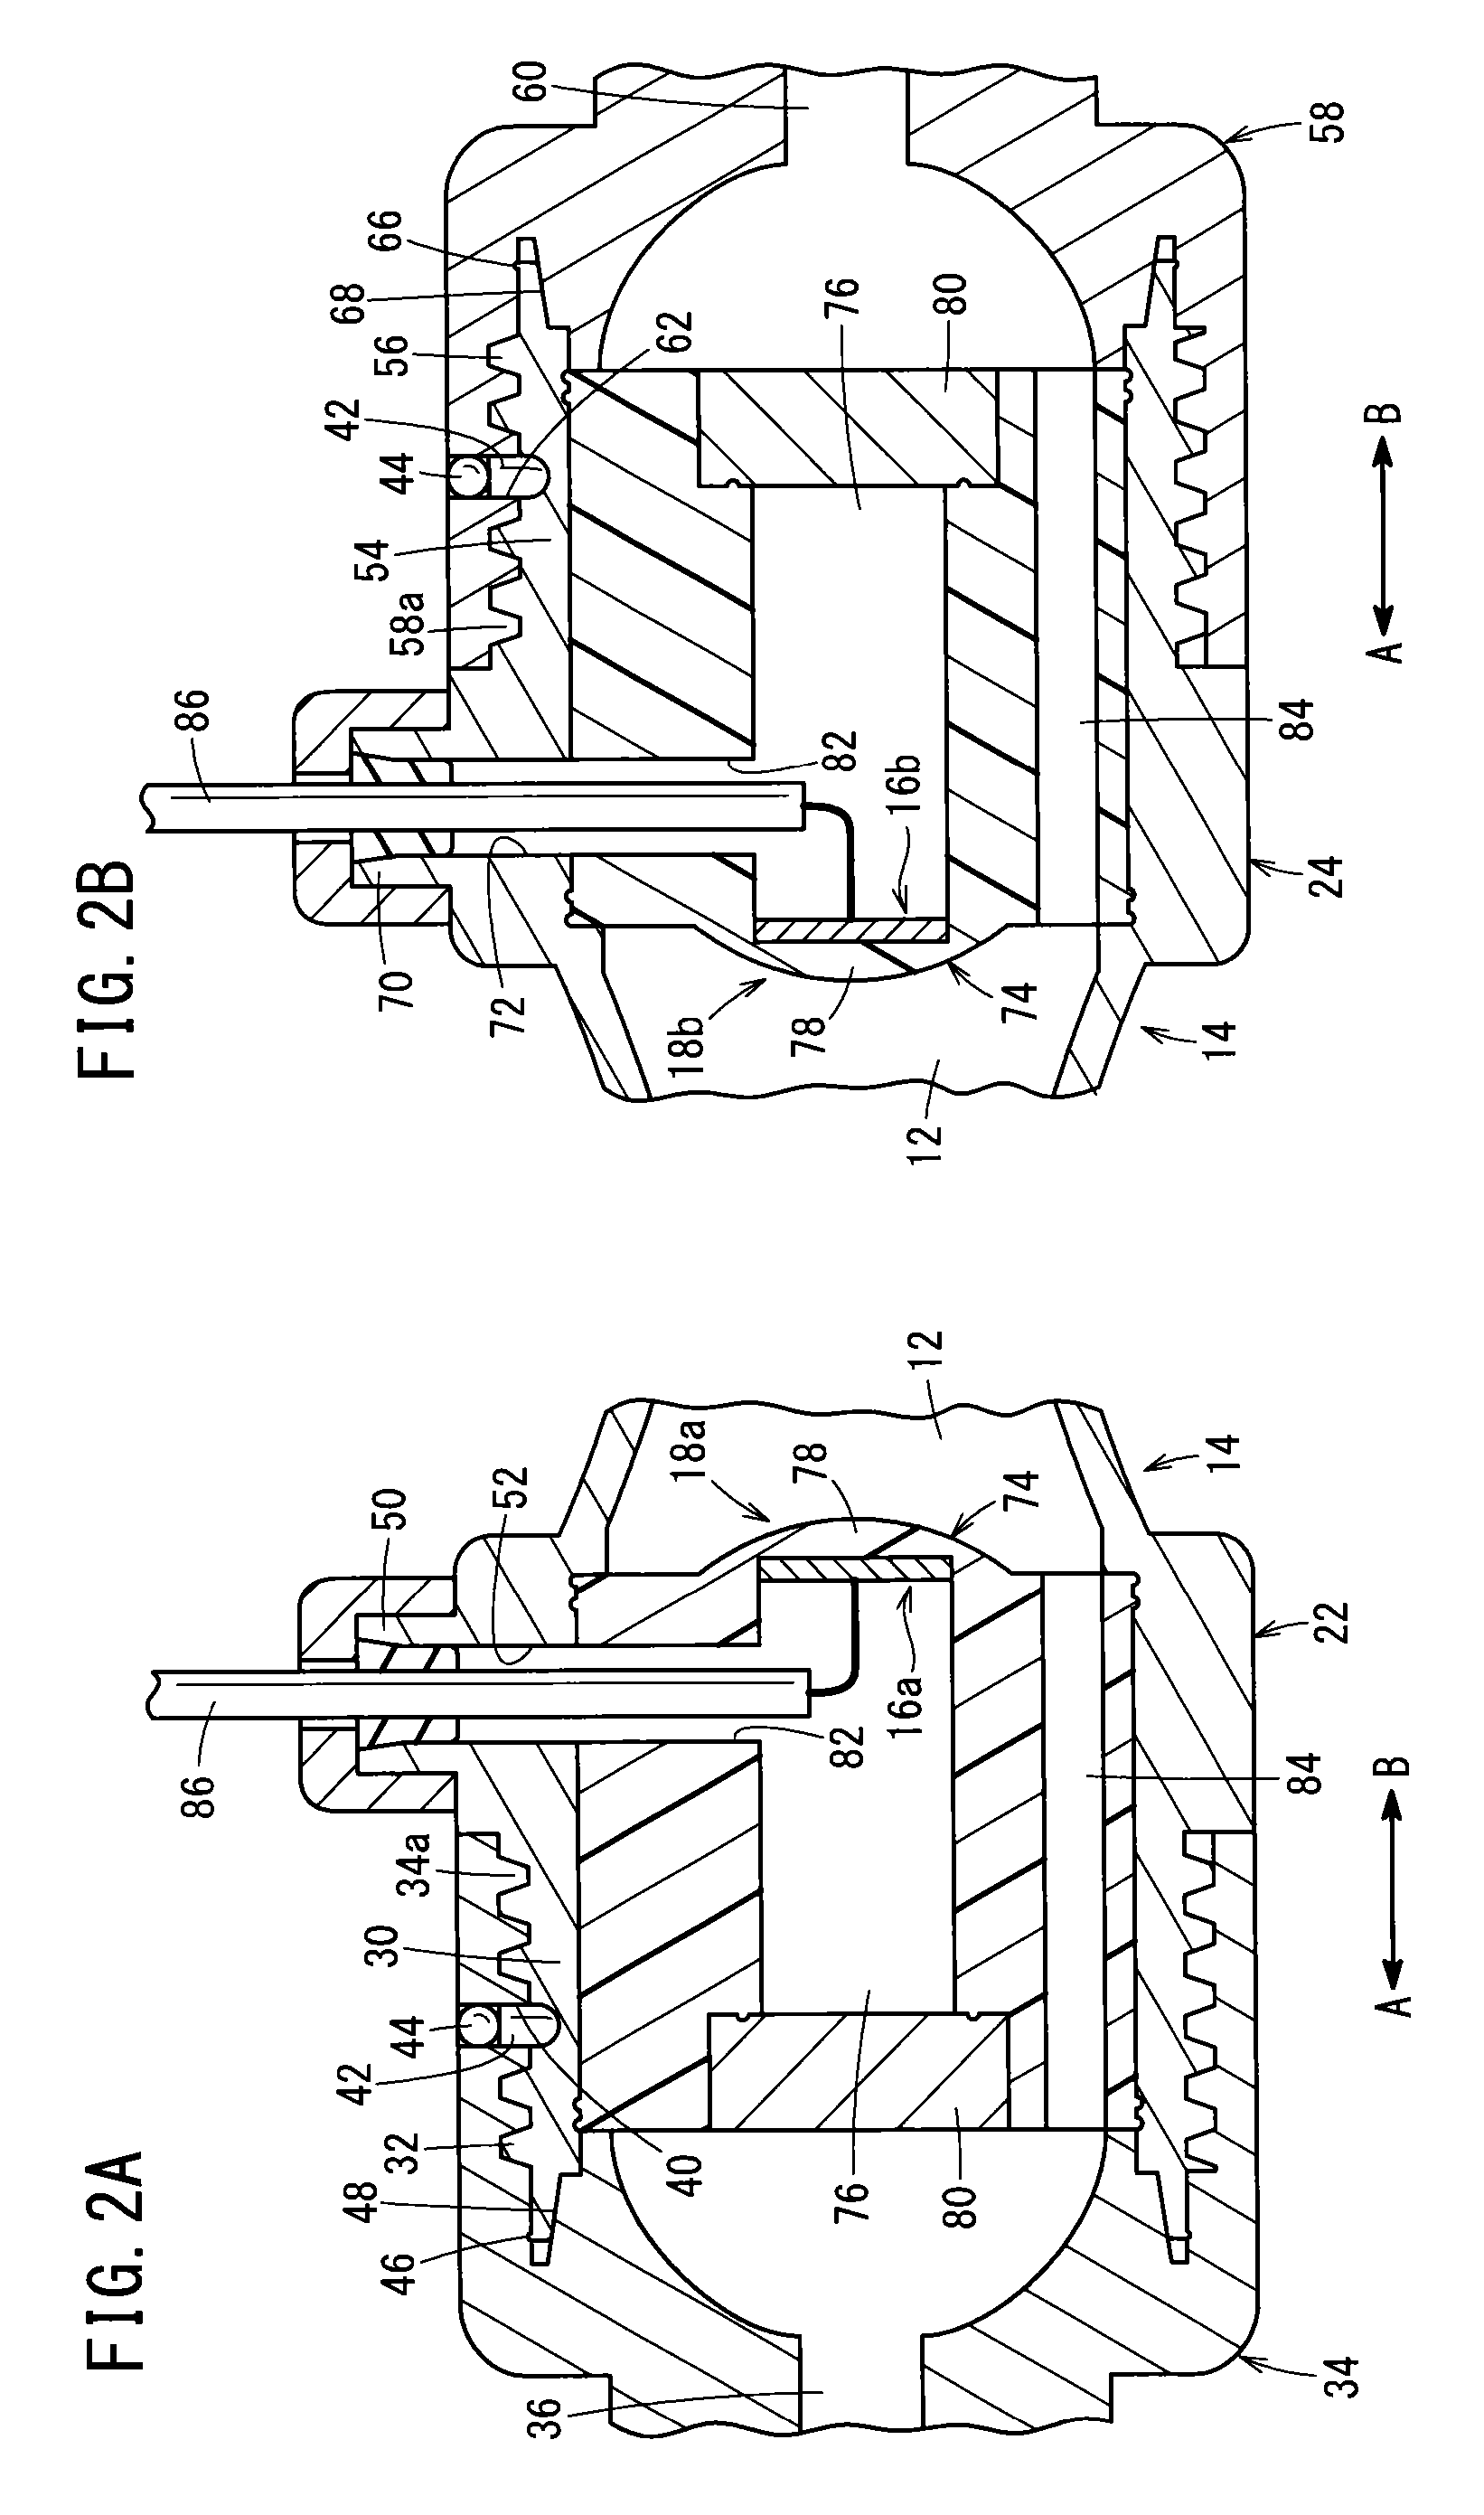 Ultrasonic flow meter having deterioration suppression in flow rate accuracy